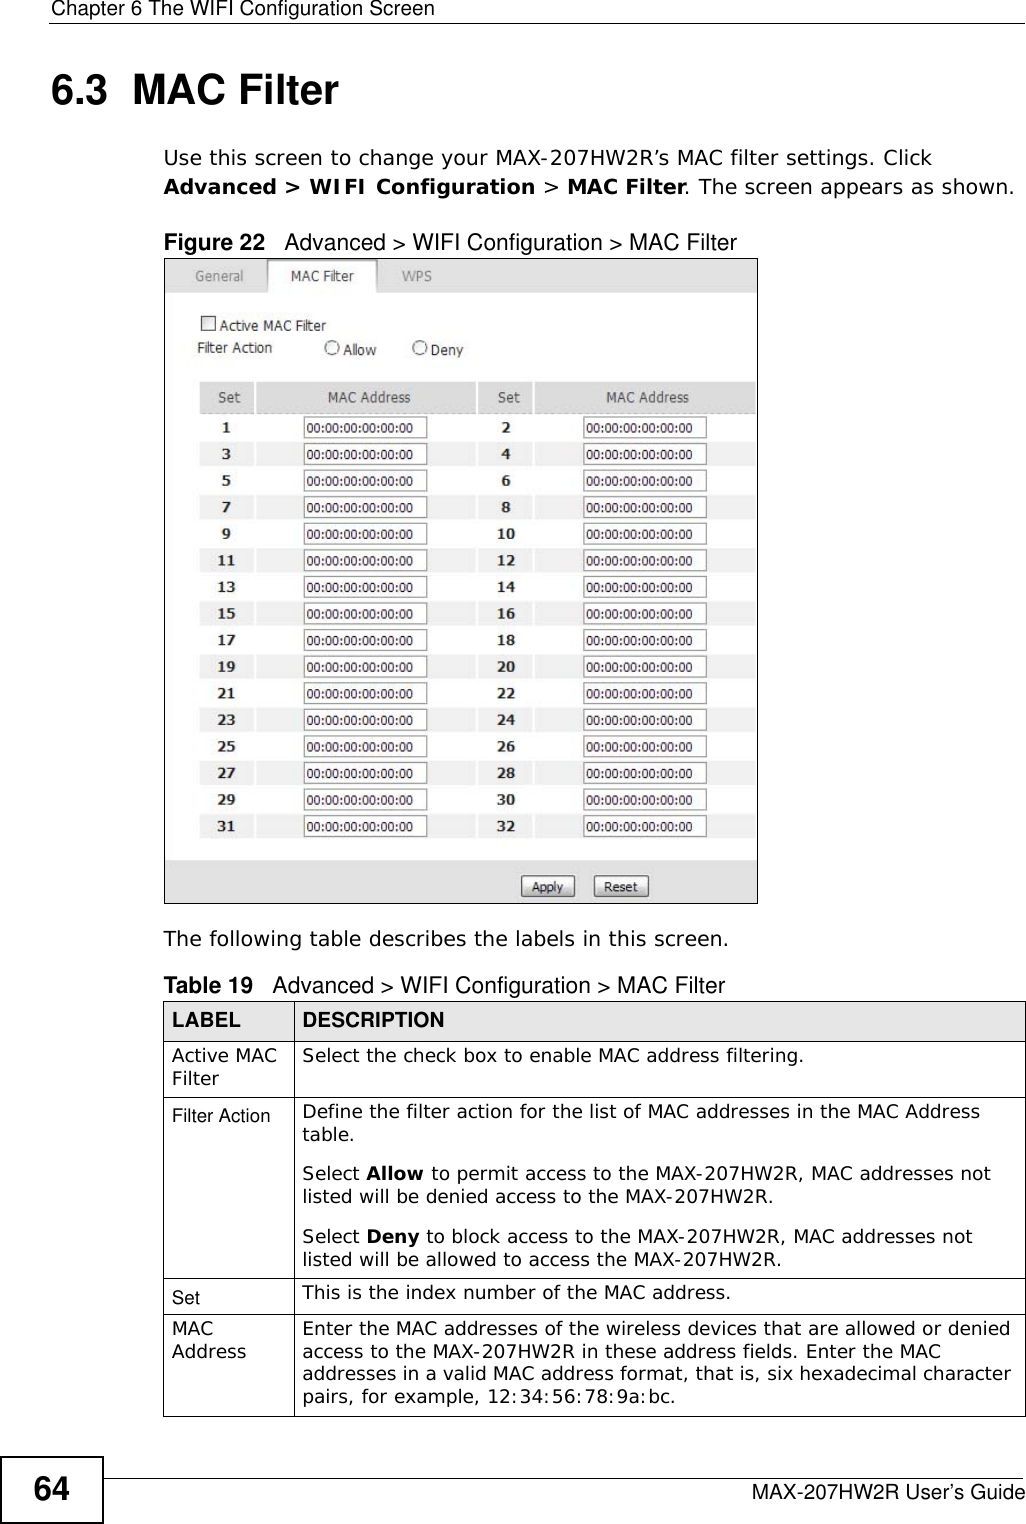 Chapter 6 The WIFI Configuration ScreenMAX-207HW2R User’s Guide646.3  MAC Filter     Use this screen to change your MAX-207HW2R’s MAC filter settings. Click Advanced &gt; WIFI Configuration &gt; MAC Filter. The screen appears as shown.Figure 22   Advanced &gt; WIFI Configuration &gt; MAC FilterThe following table describes the labels in this screen.Table 19   Advanced &gt; WIFI Configuration &gt; MAC FilterLABEL DESCRIPTIONActive MAC Filter Select the check box to enable MAC address filtering.Filter Action  Define the filter action for the list of MAC addresses in the MAC Address table. Select Allow to permit access to the MAX-207HW2R, MAC addresses not listed will be denied access to the MAX-207HW2R. Select Deny to block access to the MAX-207HW2R, MAC addresses not listed will be allowed to access the MAX-207HW2R.Set  This is the index number of the MAC address.MAC Address  Enter the MAC addresses of the wireless devices that are allowed or denied access to the MAX-207HW2R in these address fields. Enter the MAC addresses in a valid MAC address format, that is, six hexadecimal character pairs, for example, 12:34:56:78:9a:bc.